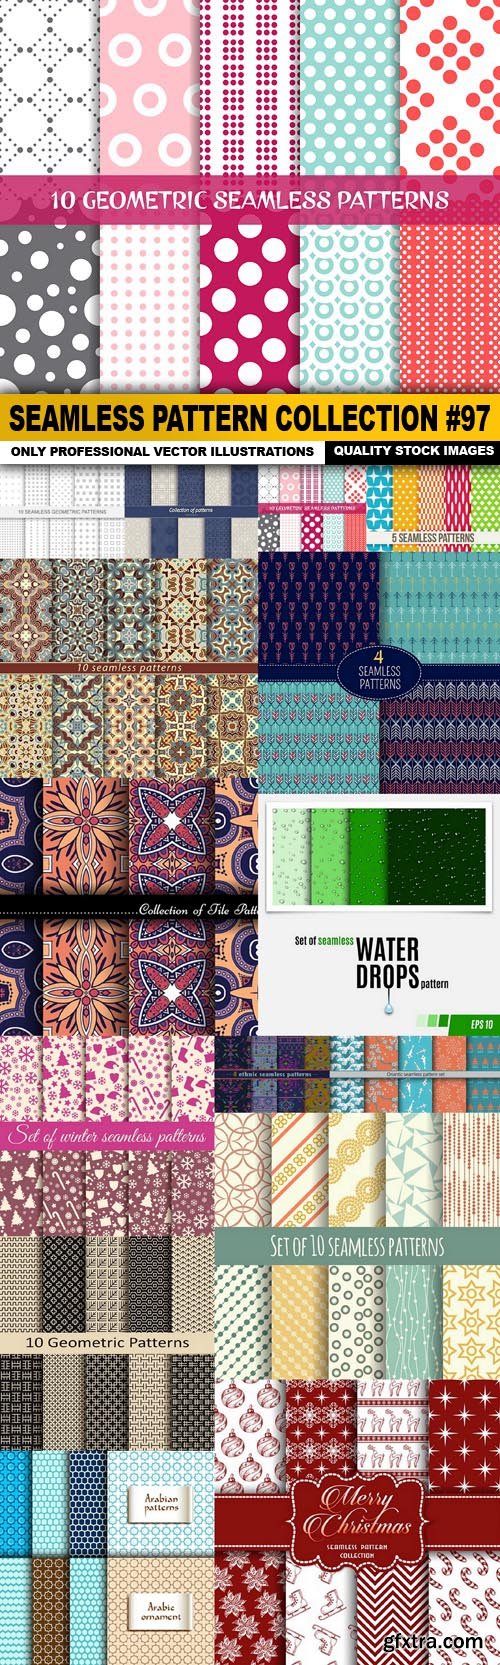 Seamless Pattern Collection #97 - 15 Vector